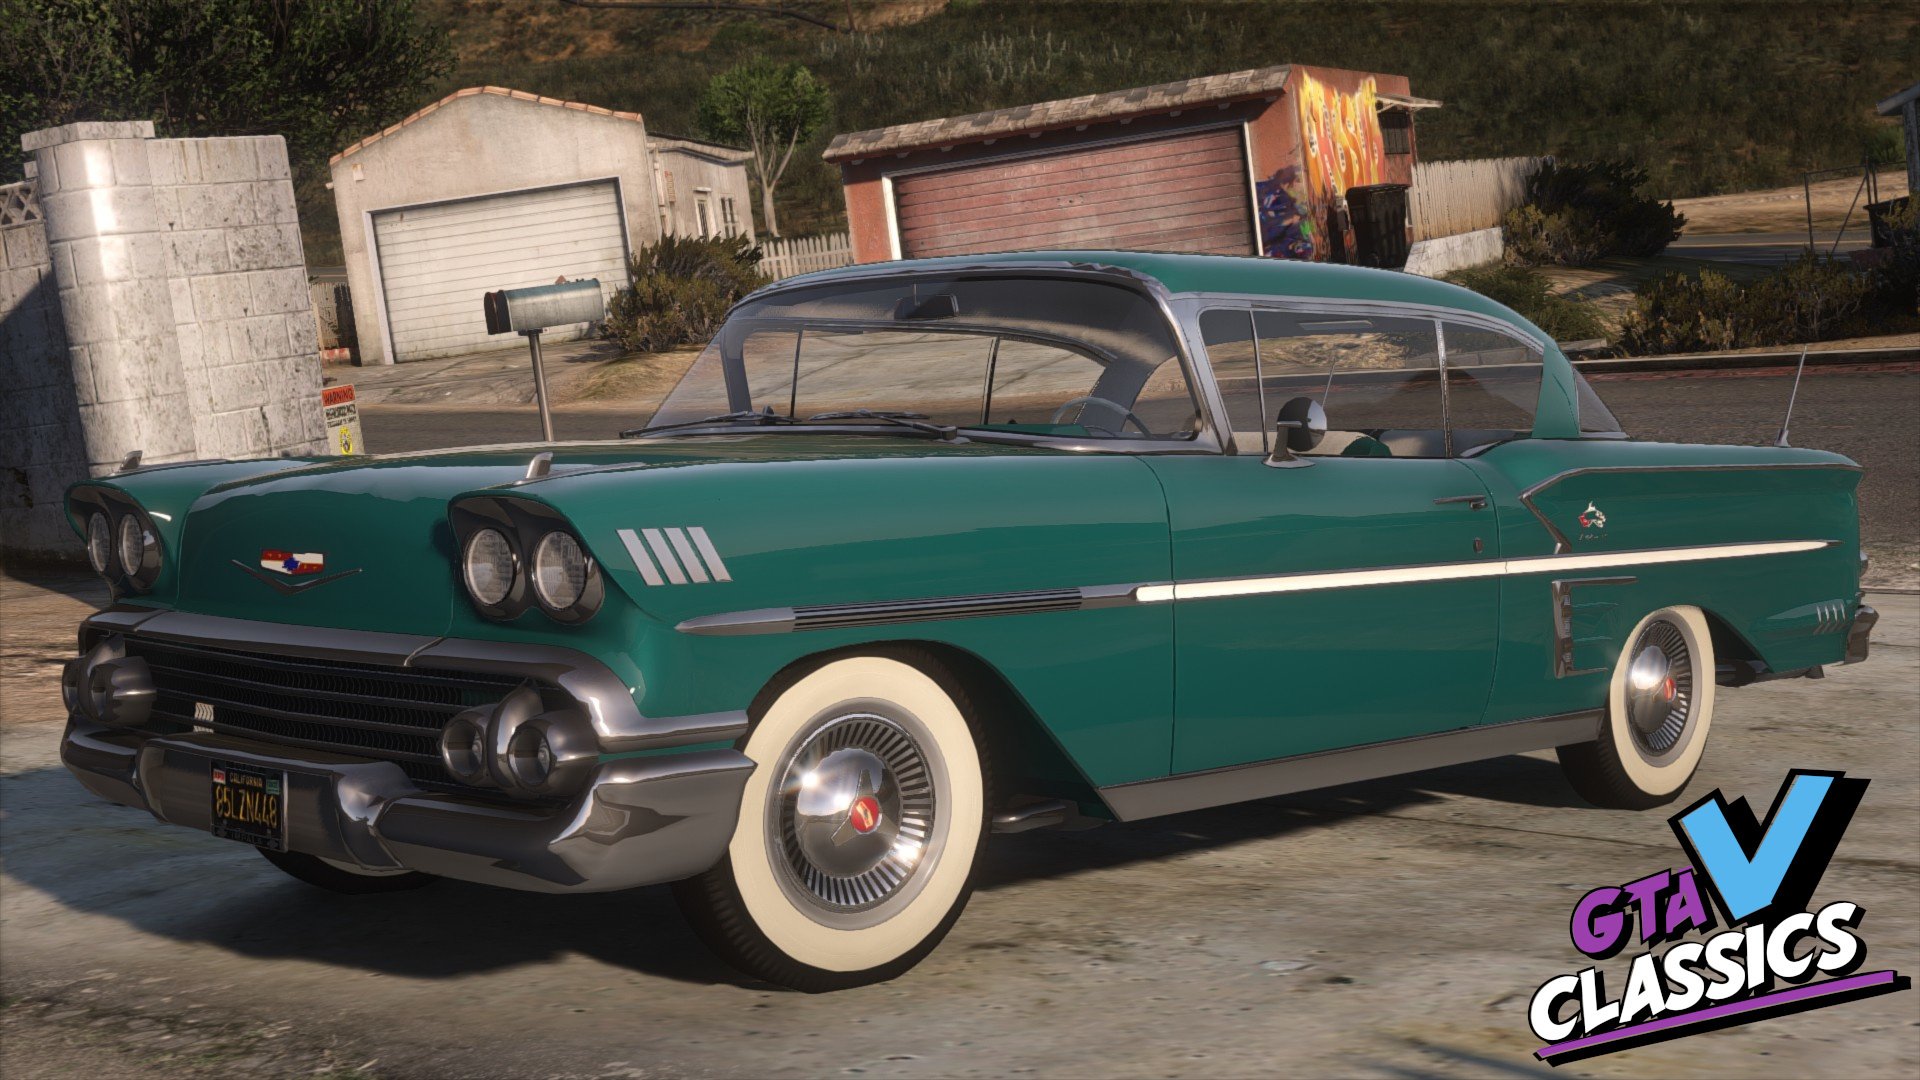 1958 Chevrolet Impala GTA V Mod Looks Spot On, Is a Nightmare to Drive